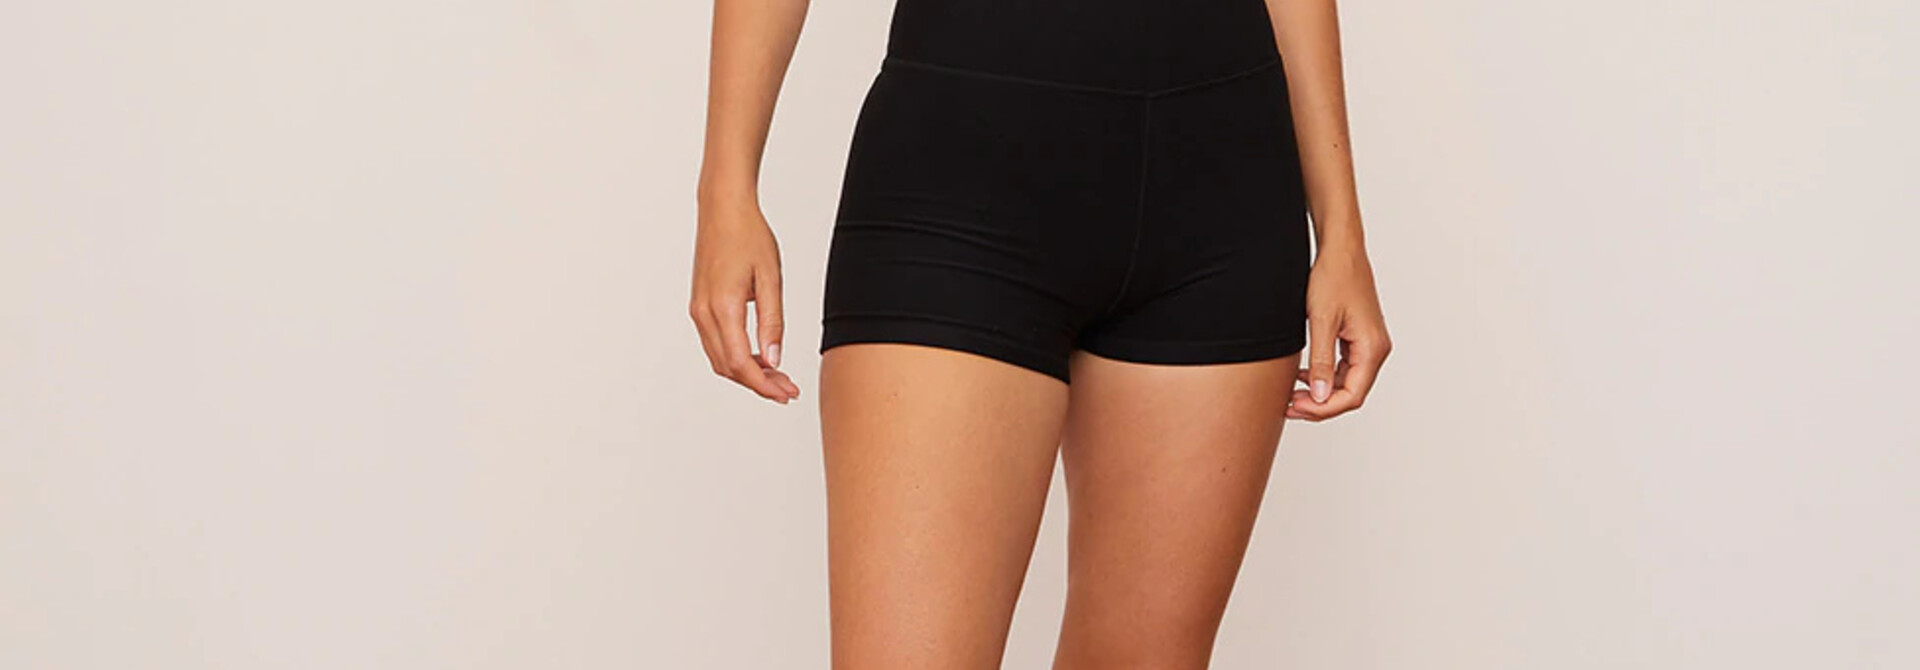 Wolven High Waisted Short - Onyx